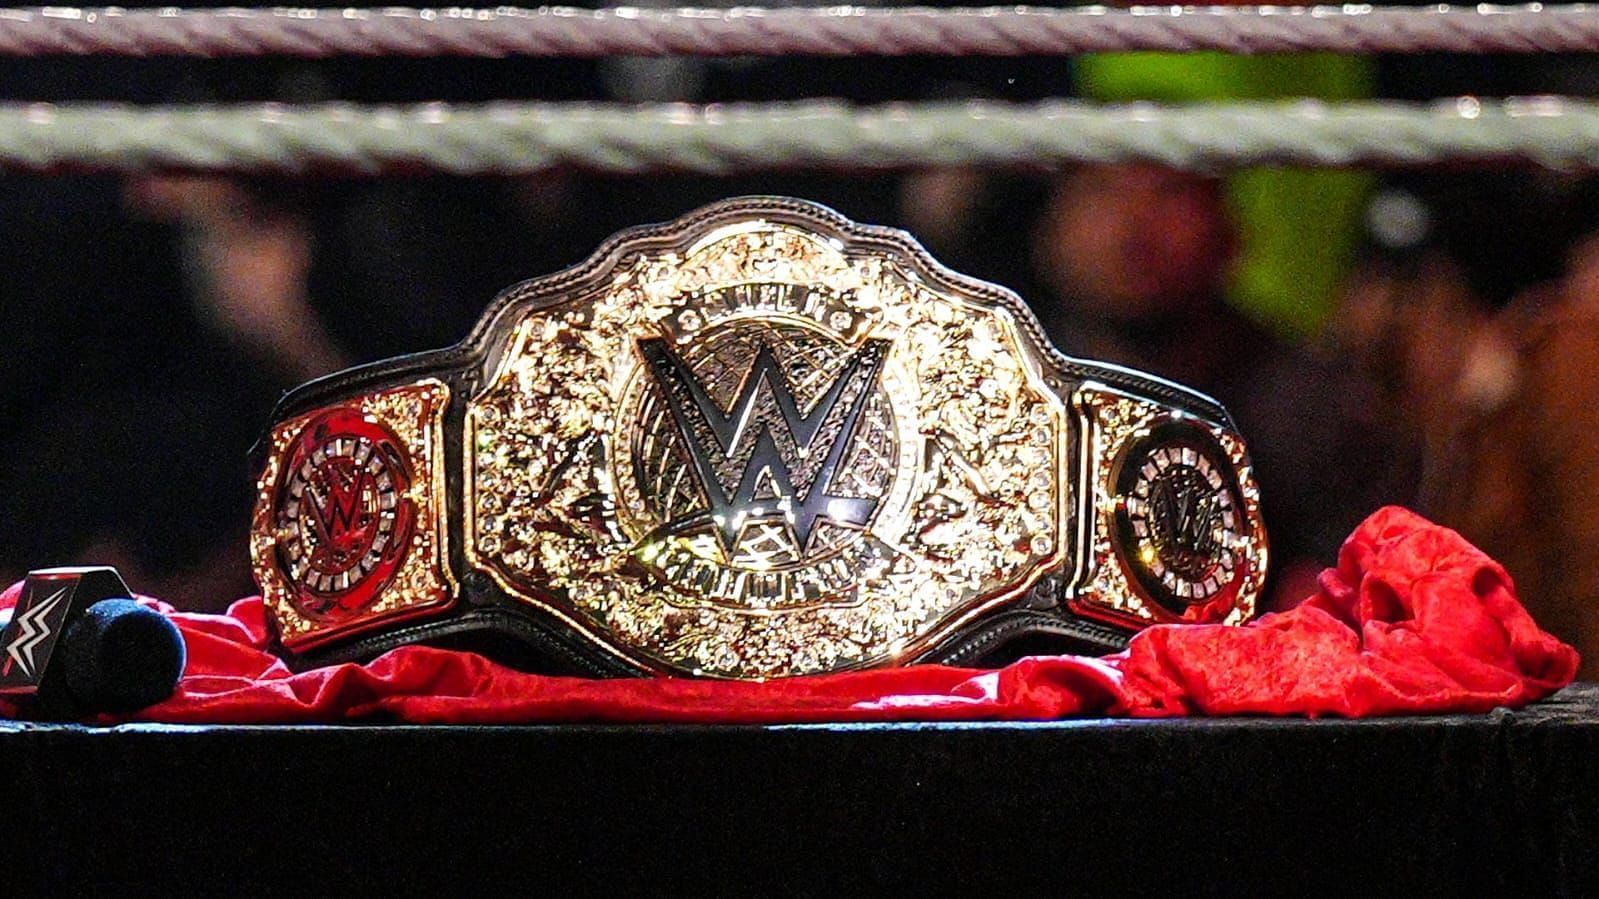 Triple H unveiled the new design of the World Heavyweight Championship on Raw.